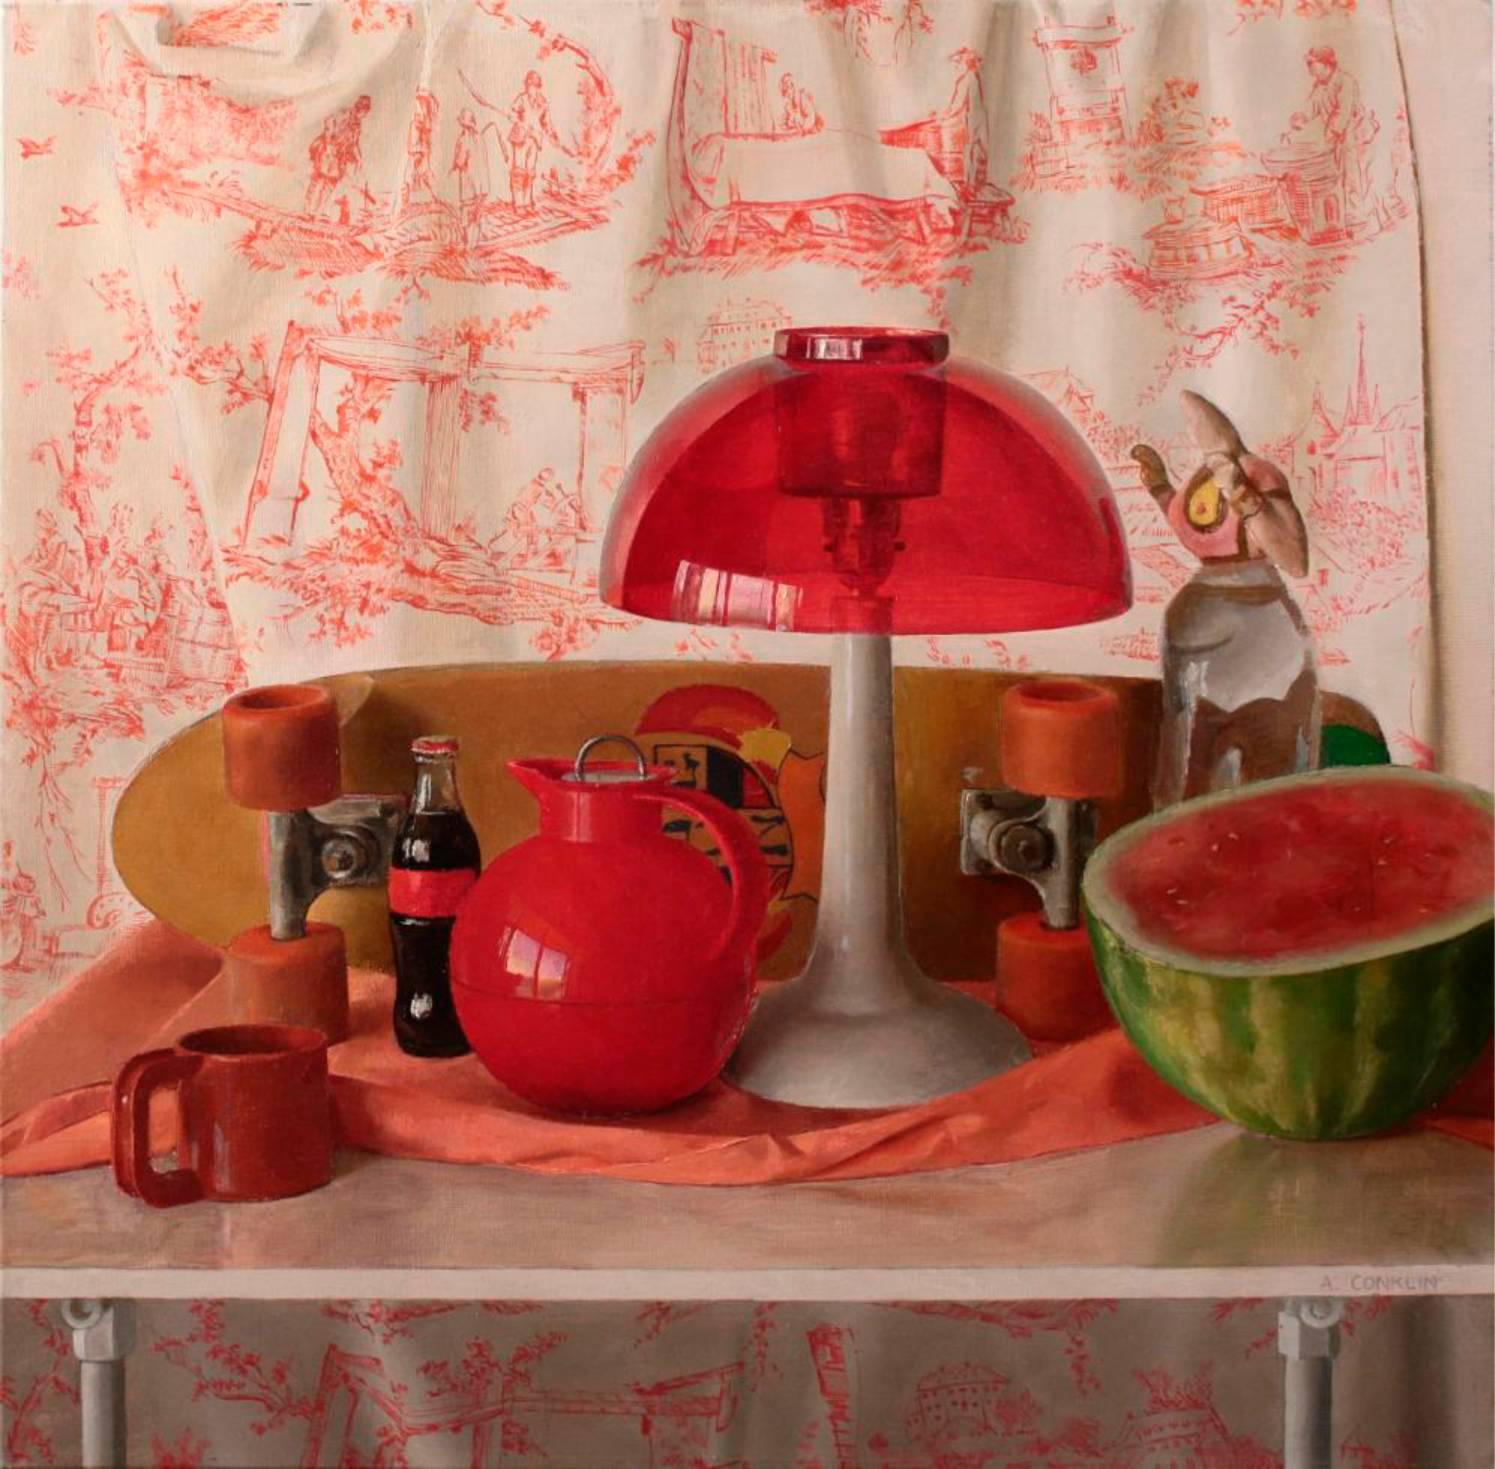 Andrew S. Conklin Still-Life Painting - Square Red Still Life - Original Oil Painting with Skateboard and Mixed Objects